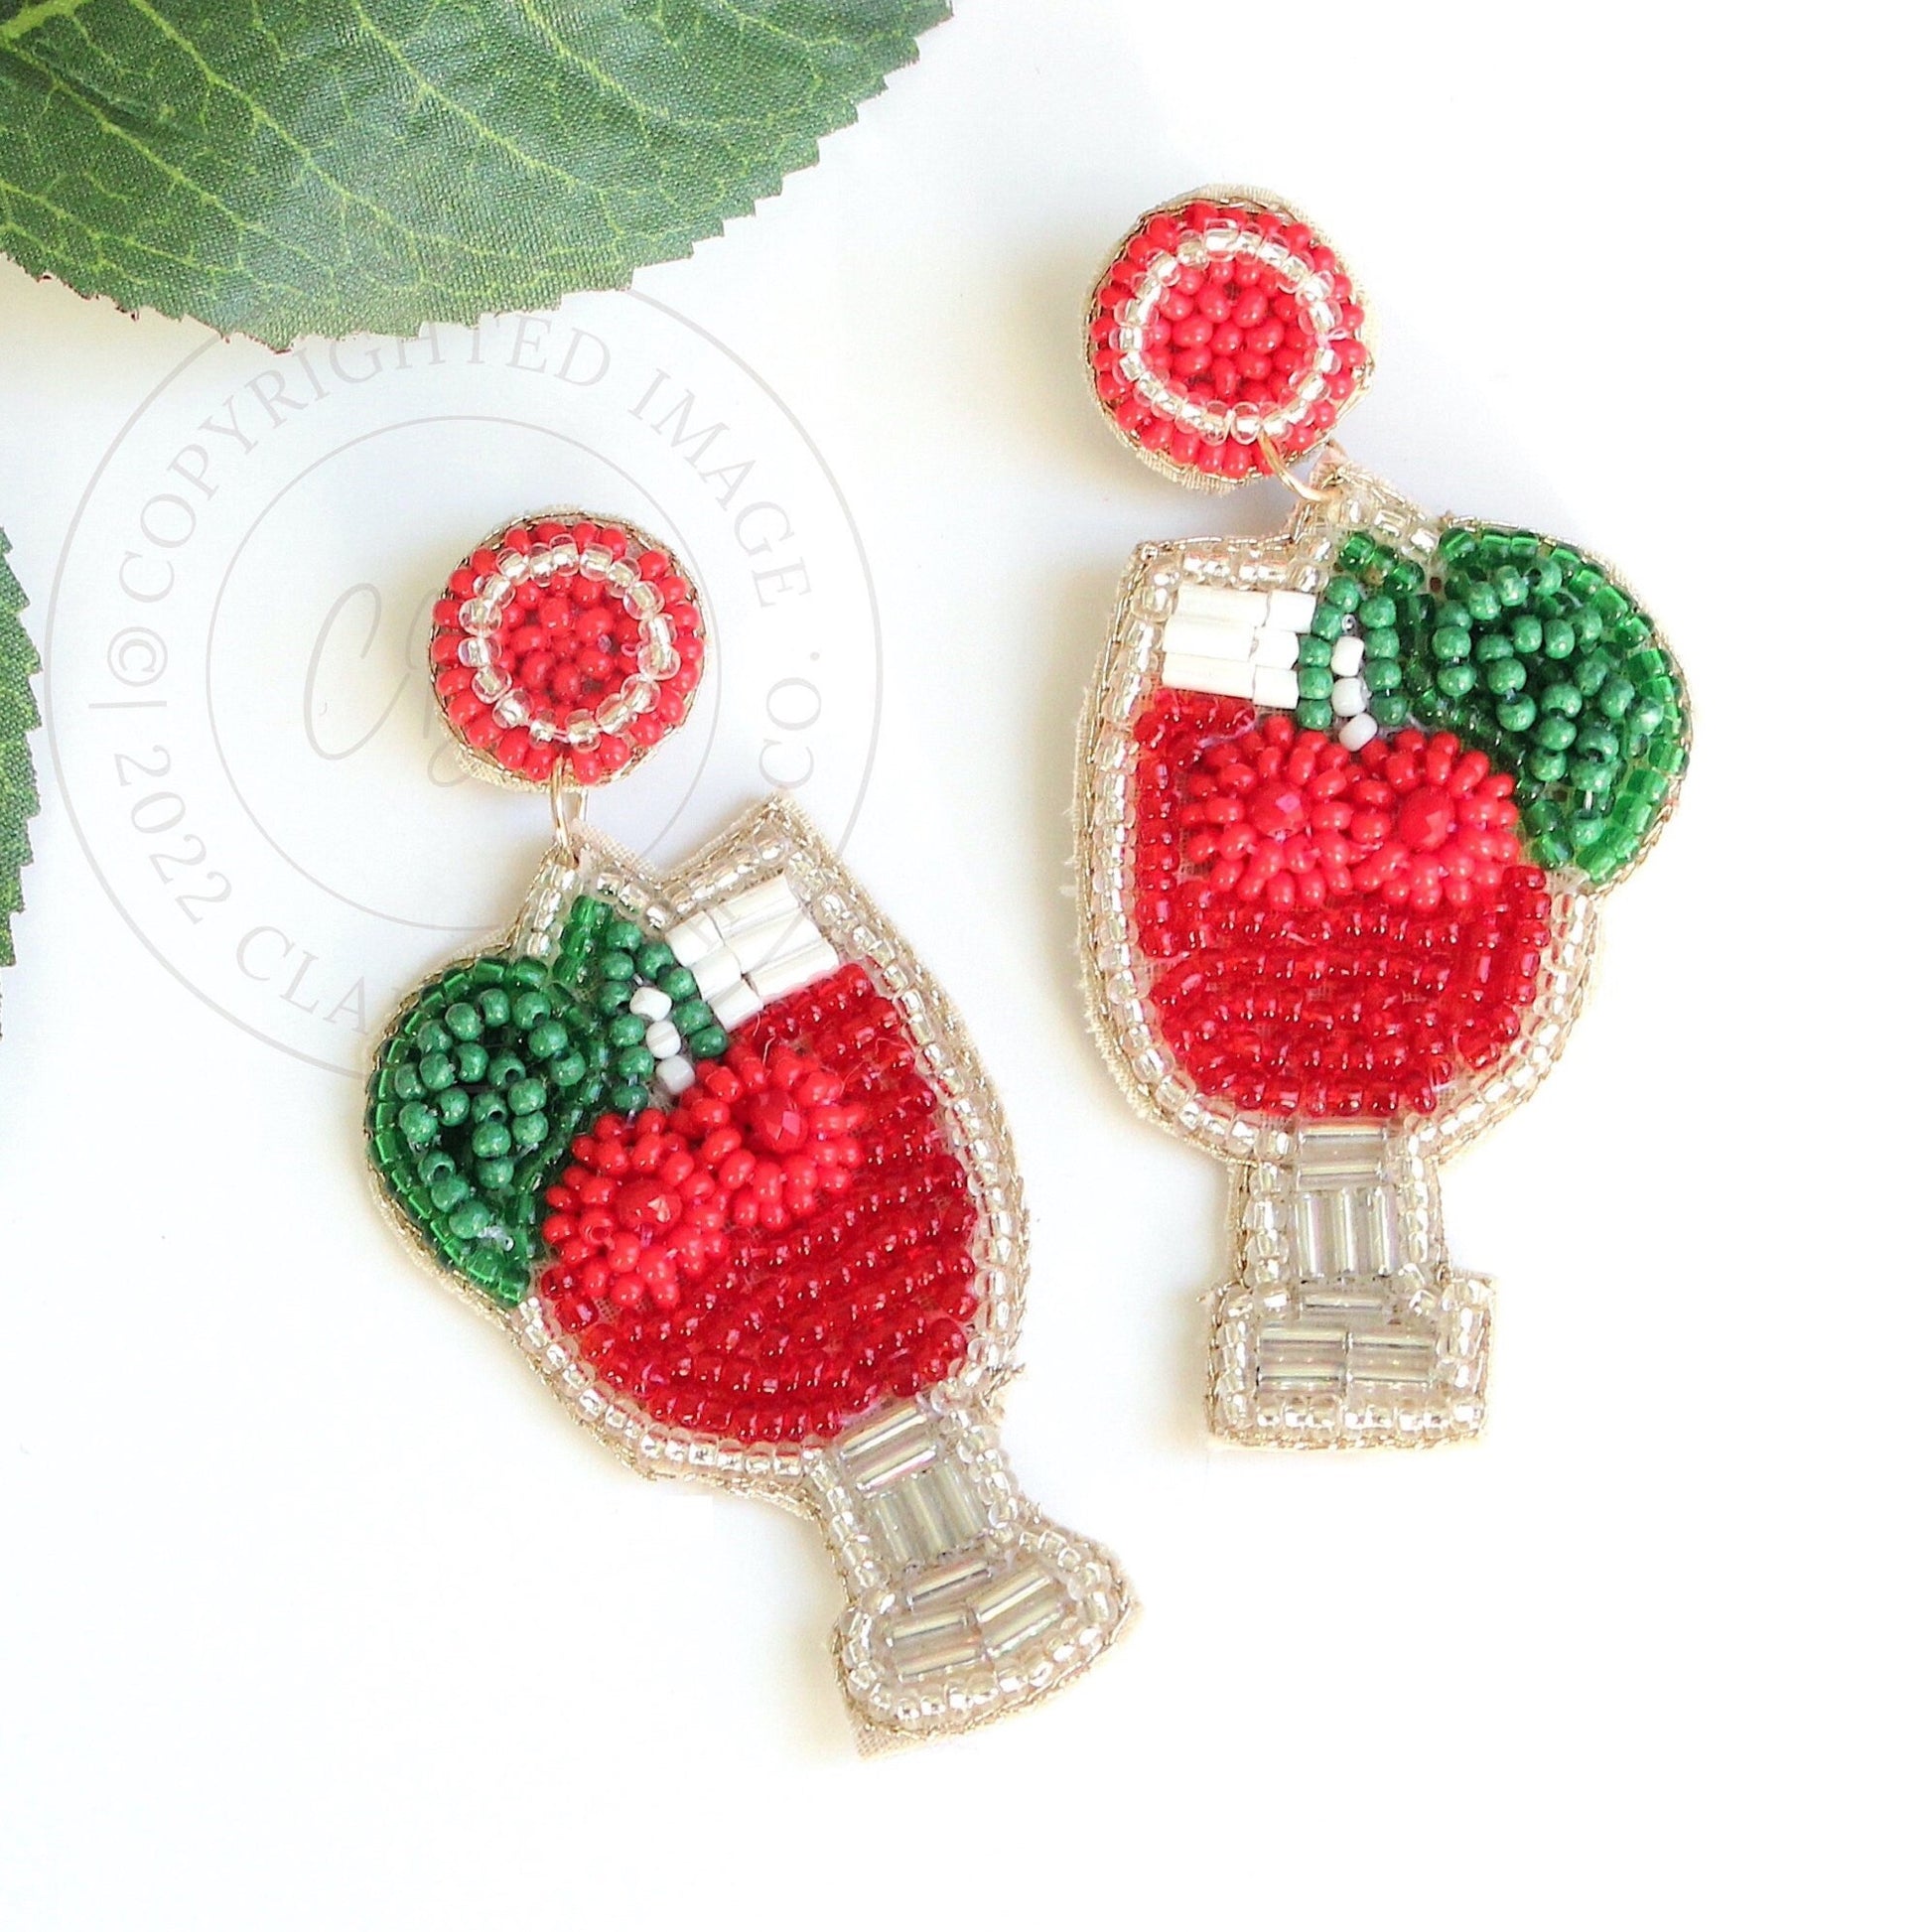 cherry drink beaded earrings laying on table next to green leaf